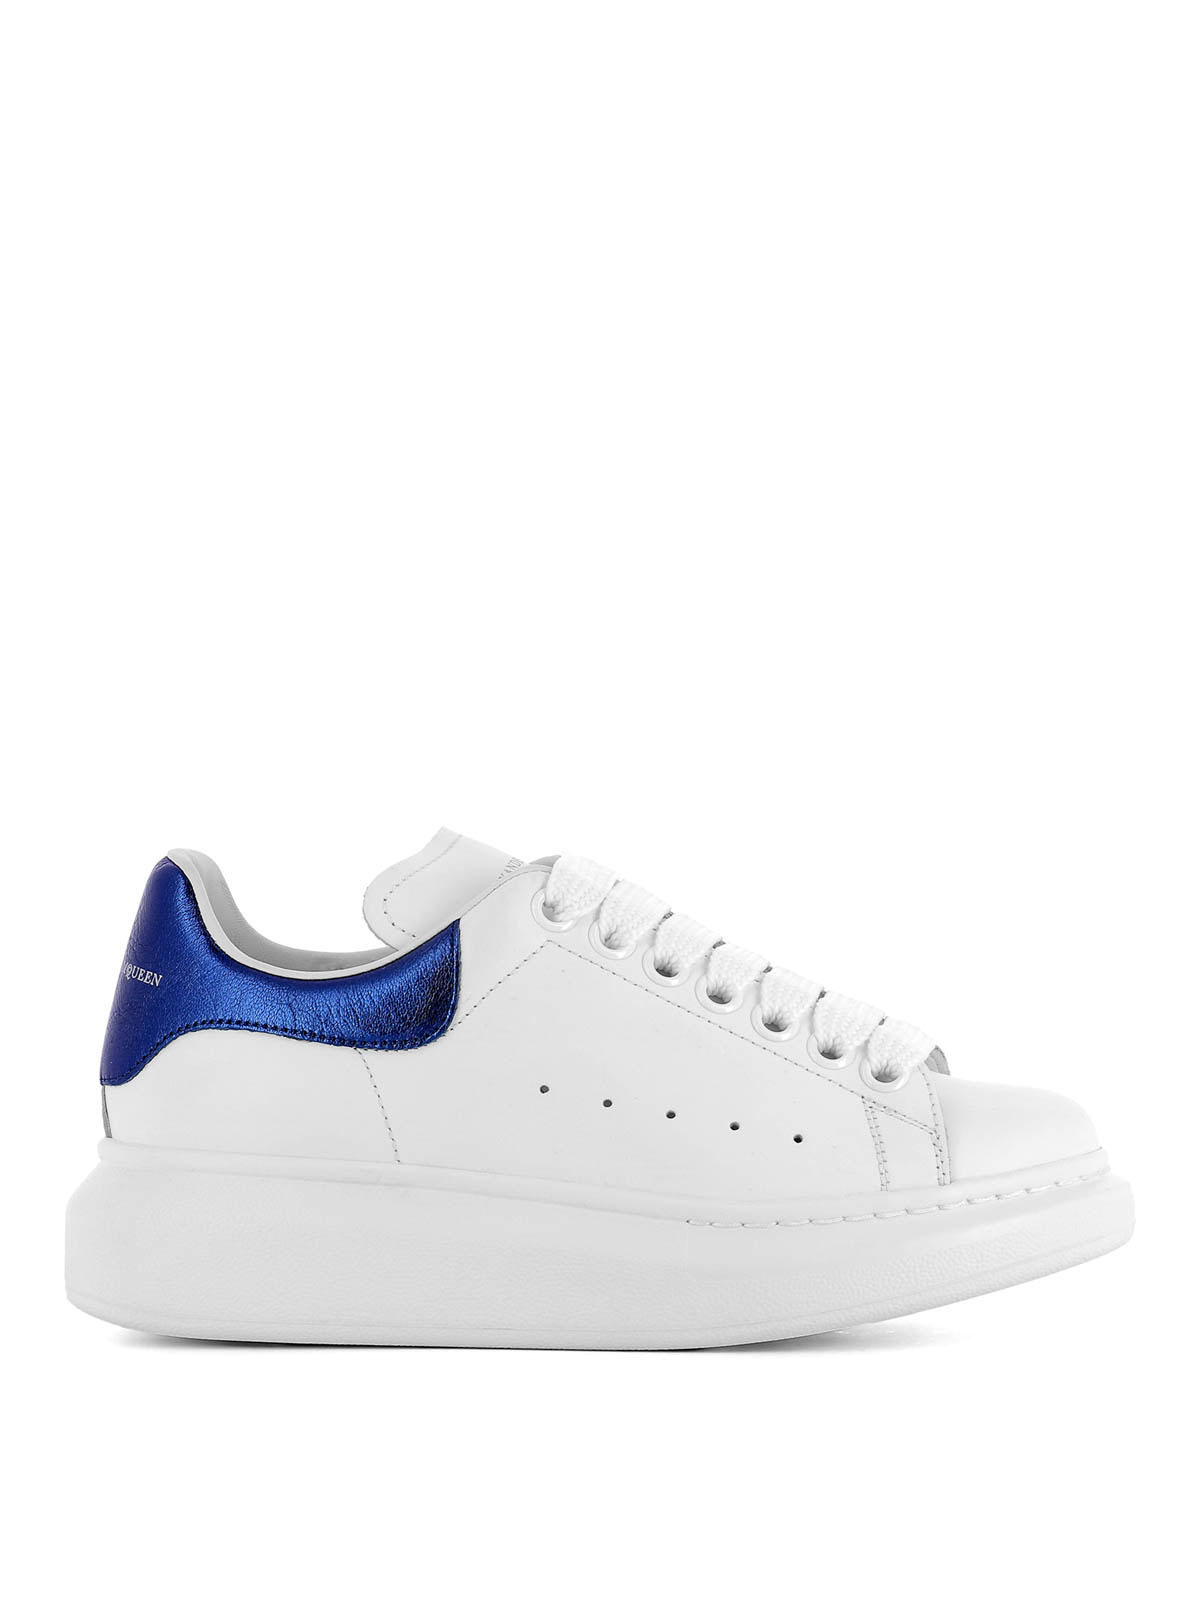 Trainers Alexander Mcqueen - Blue detail leather sneakers - 462214WHFBU9086